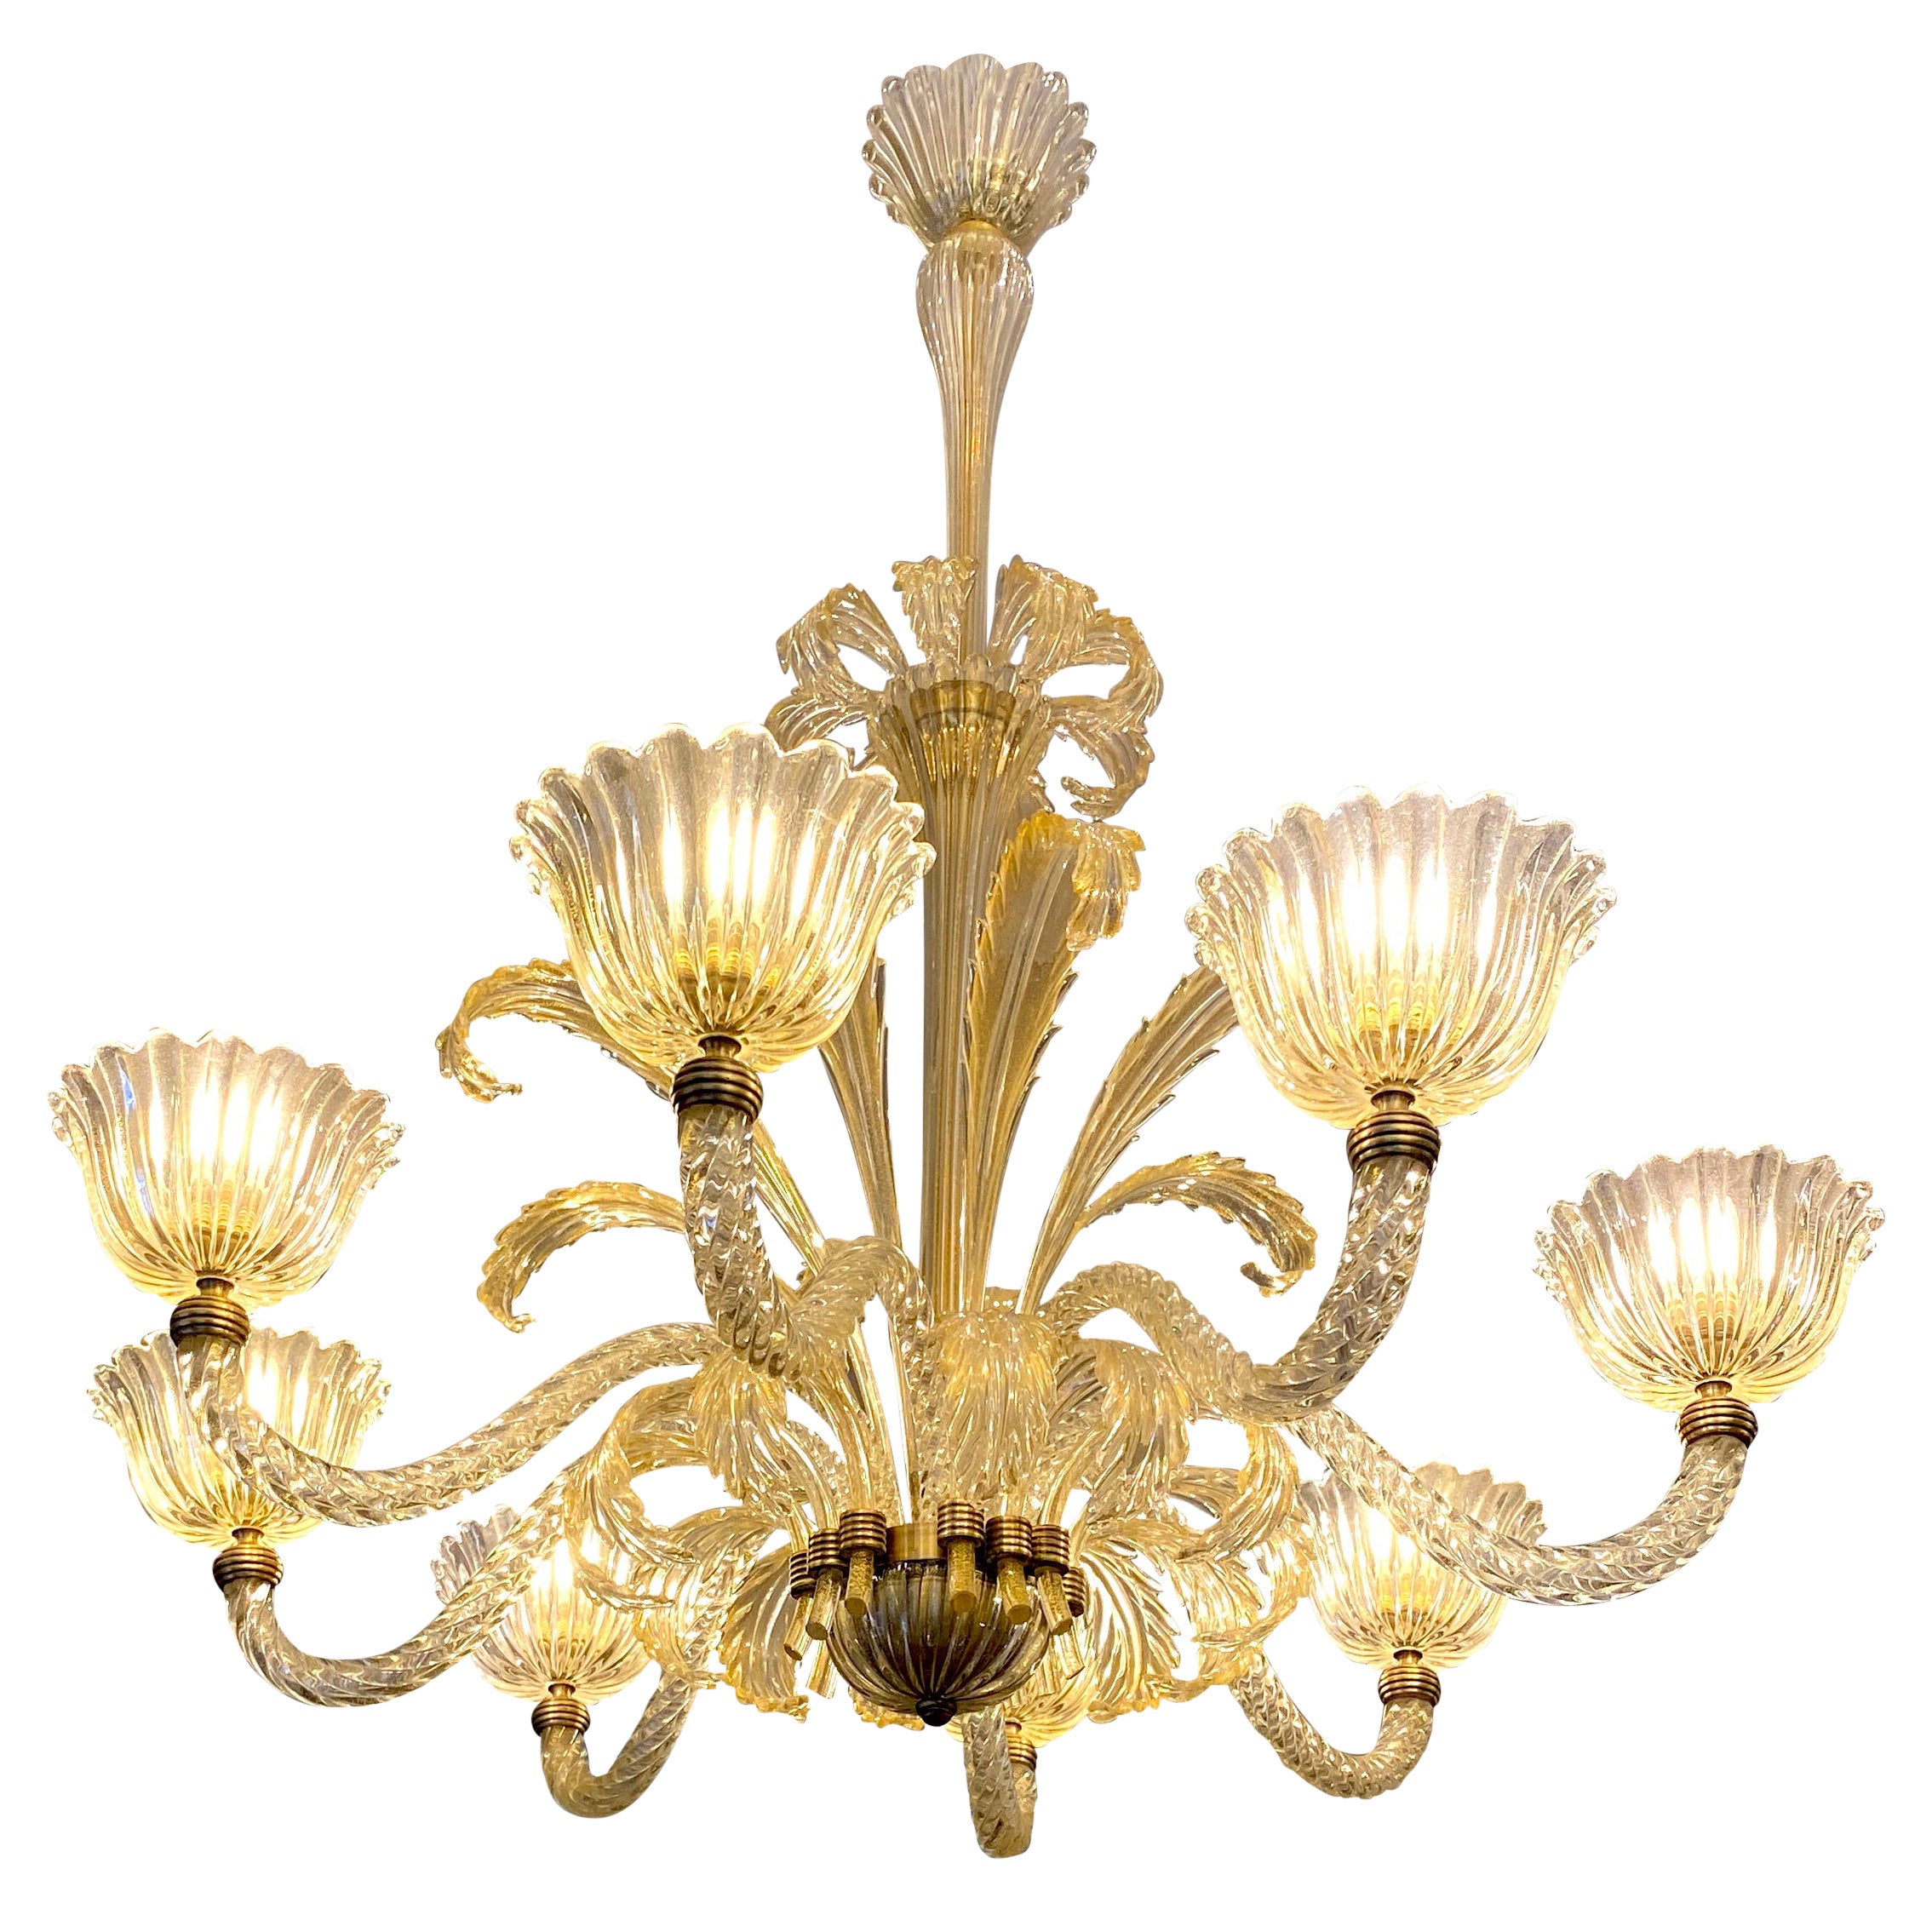 Magnificent Art Deco Mounted Murano Glass Chandelier by Ercole Barovier, 1940 For Sale